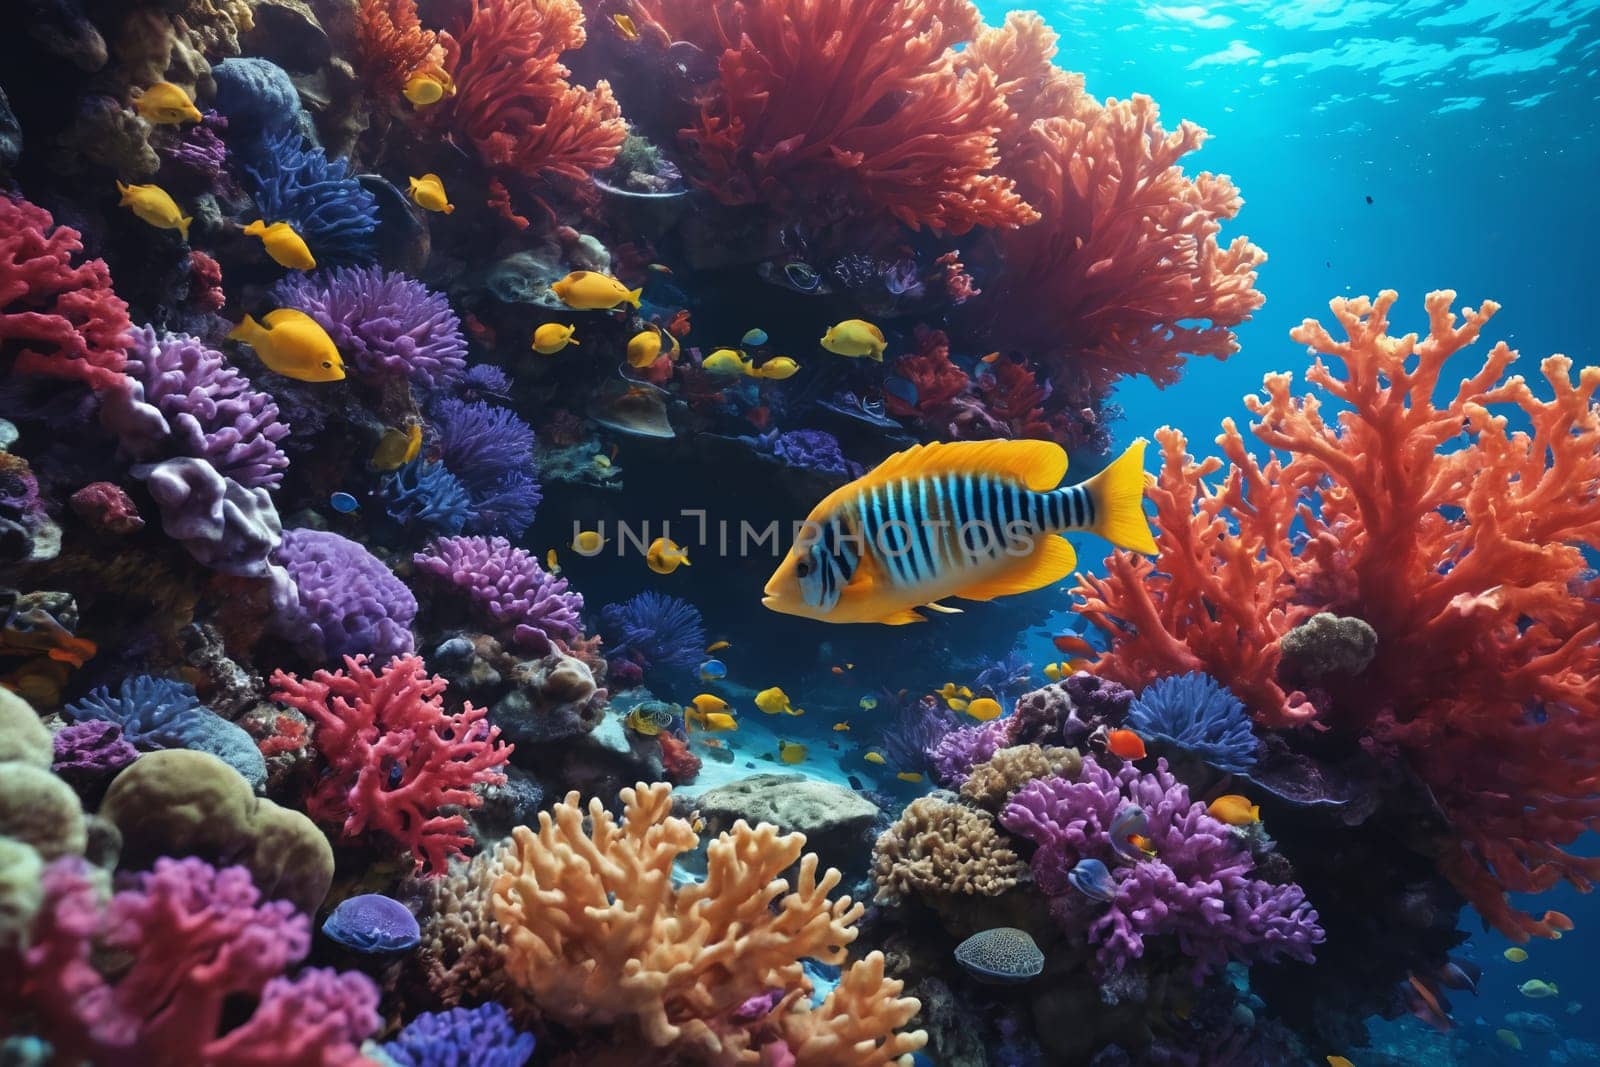 This image showcases the underwater ecosystem of a coral reef, bustling with life and color, making it perfect for marine biology education and promotion of conservation initiatives.